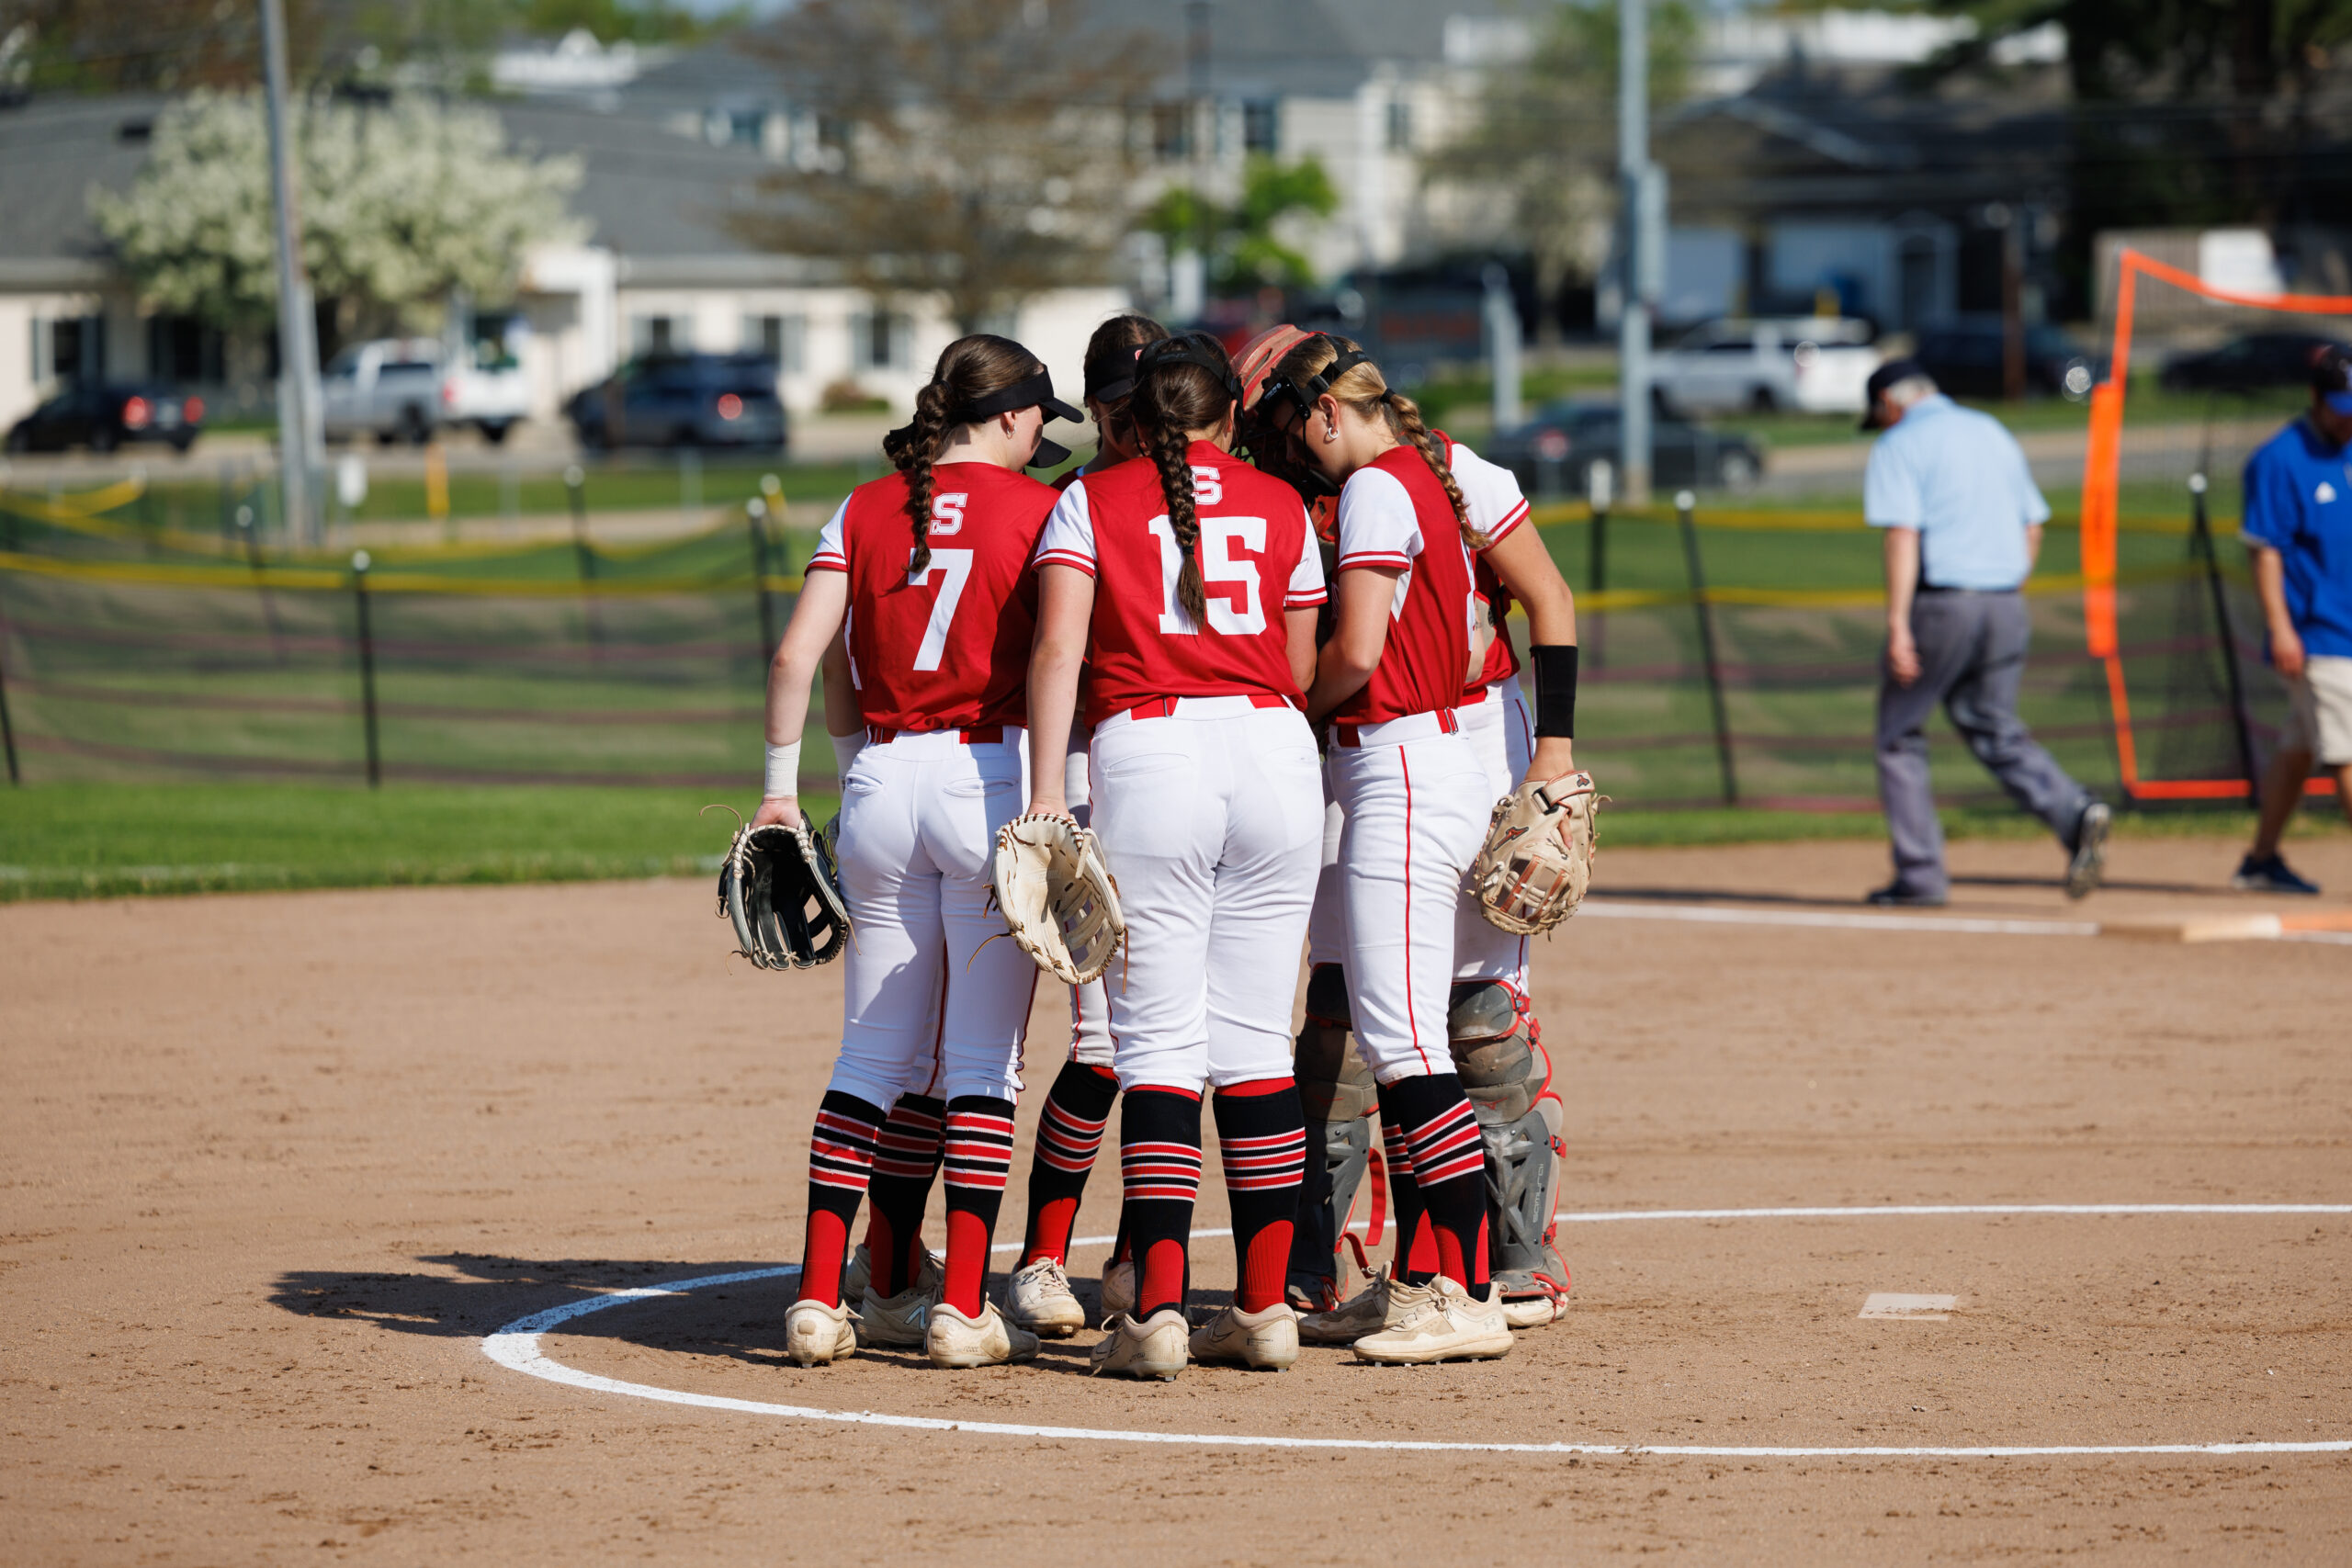 Softball Team In Huddle at PItchers Mound